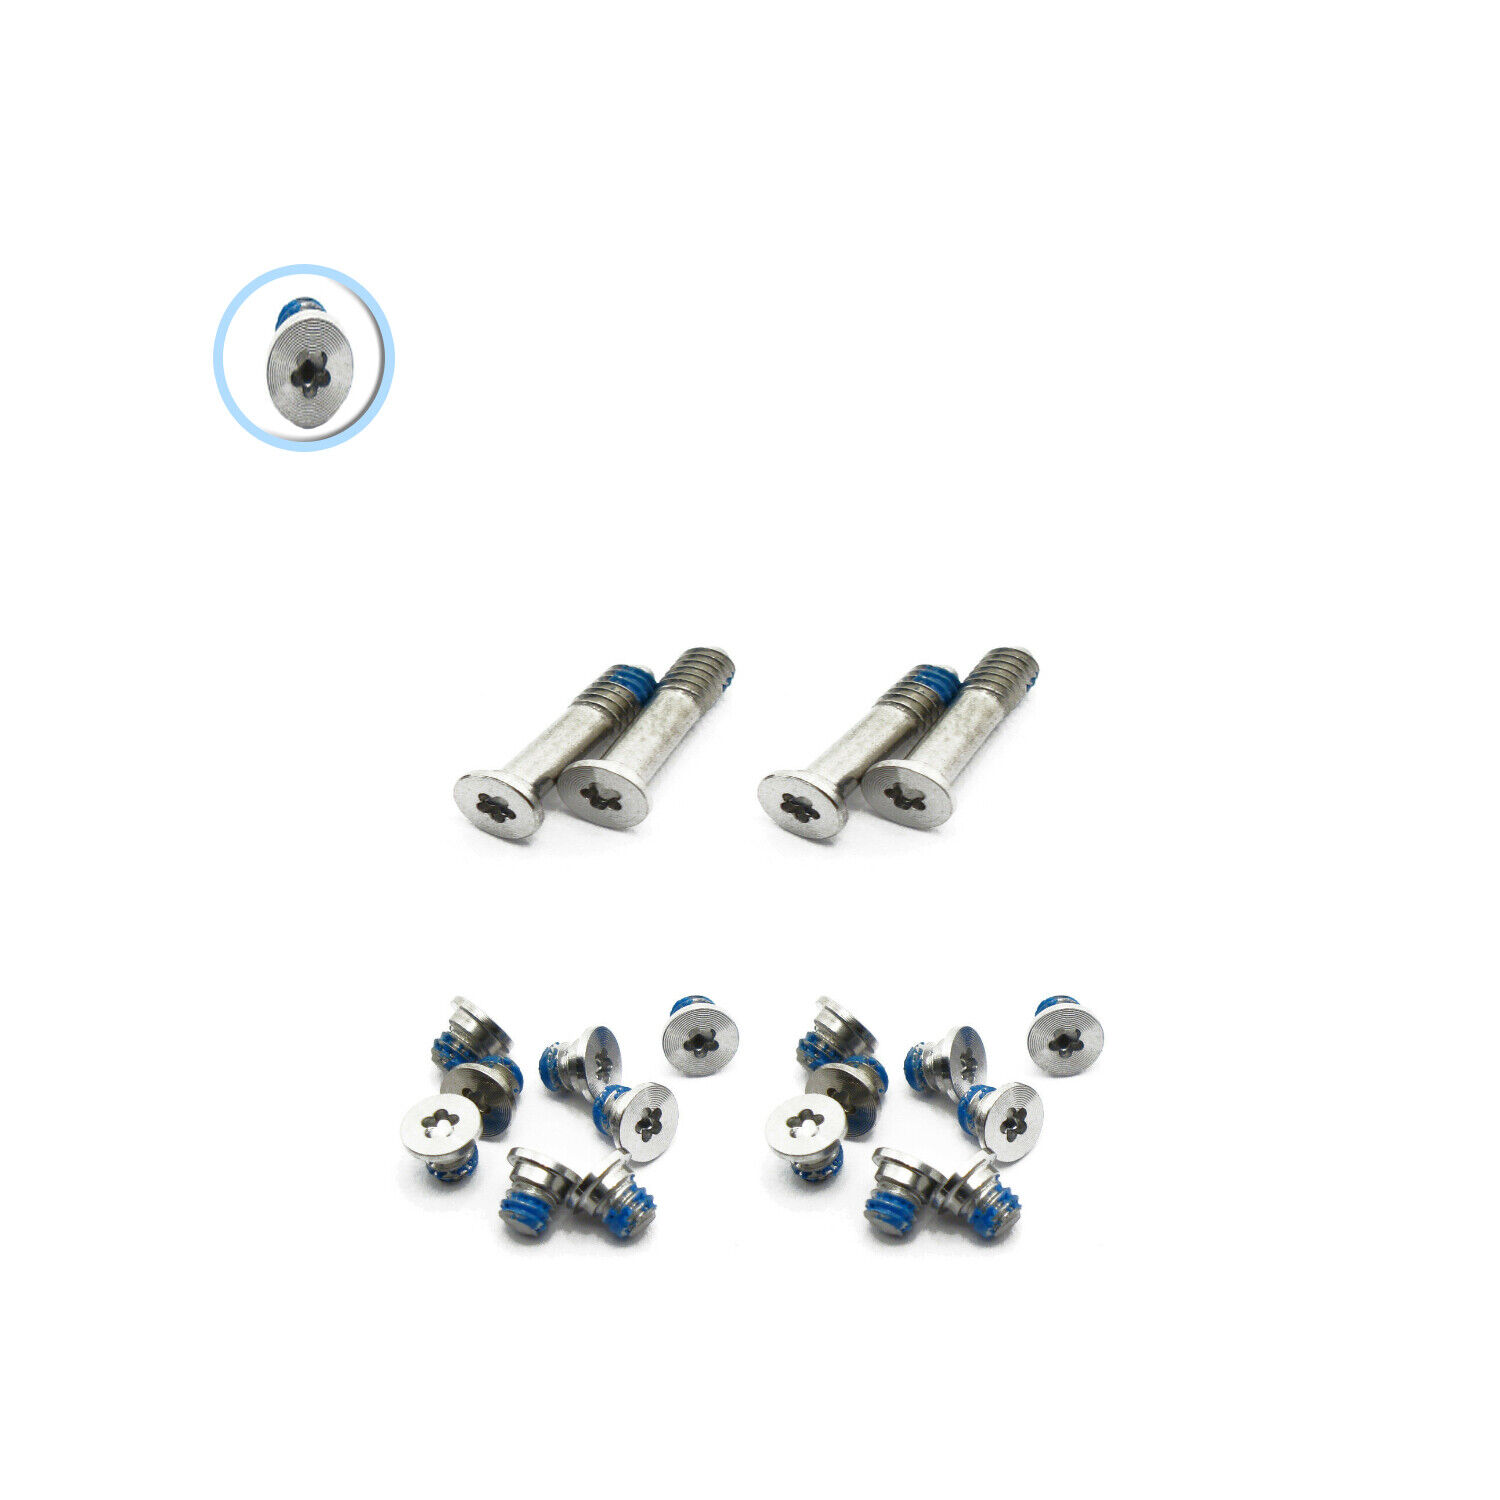 New 2x10 pcs Bottom Case Screws Set for Macbook Air 2011 2012 2013 2014 2015 Unbranded/Generic Does Not Apply - фотография #3